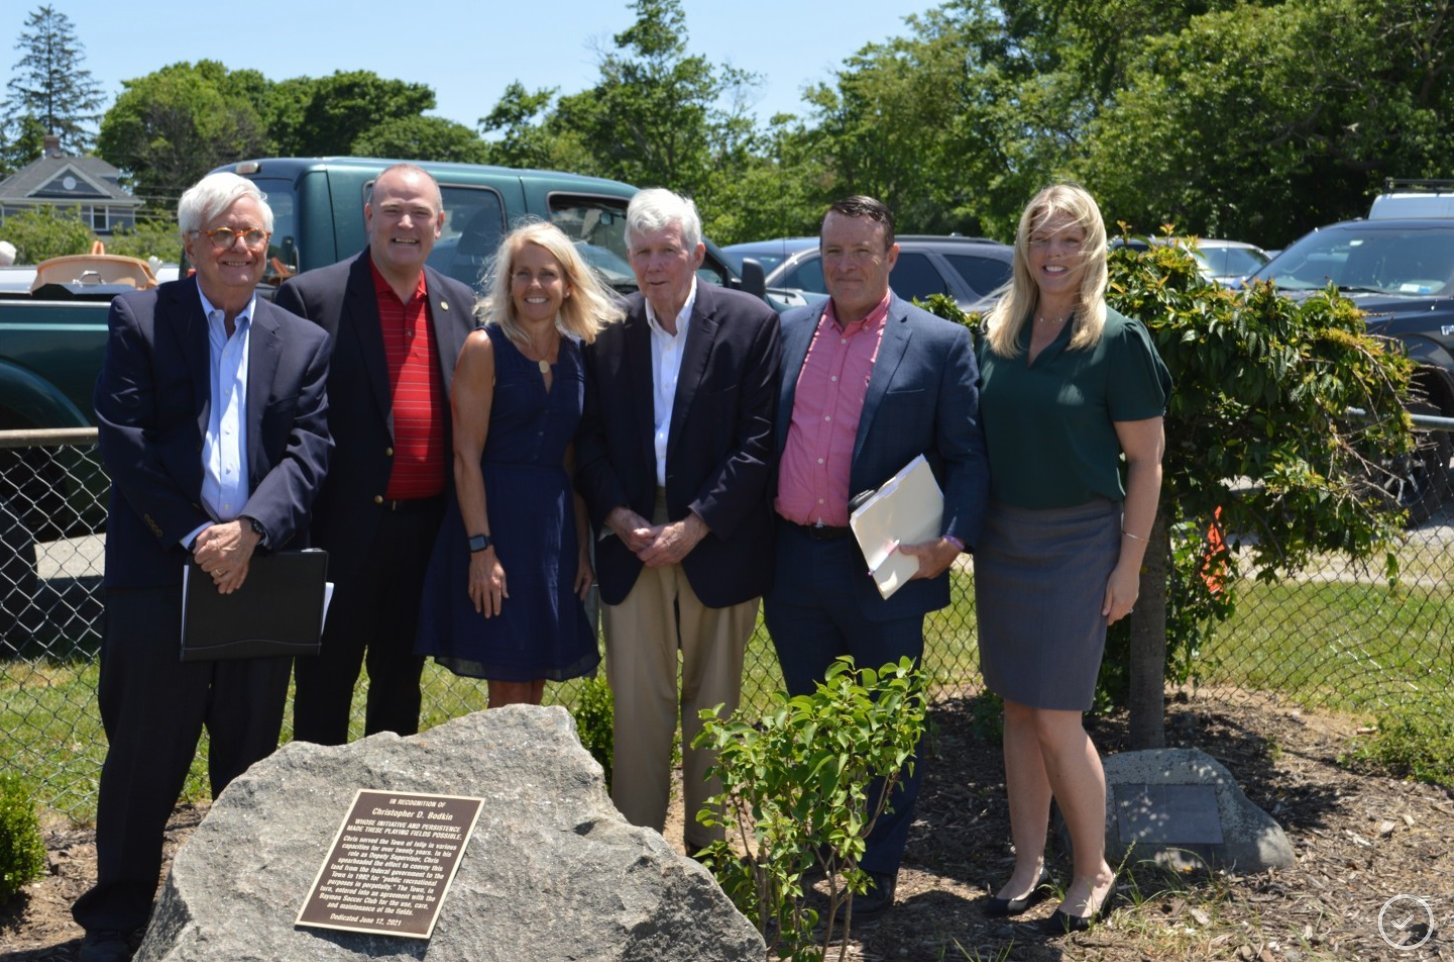 Former Islip deputy supervisor Chris Bodkin (fourth from left) stands before the memorial dedicated to his efforts in preserving Cherry Avenue property for soccer fields. With him are (left to right) friend Tommy Travis, councilmembers Jim O’Connor and Mary Kate Mullen, Bodkin, James Bertsch and NYS Sen. Alexis Weik.